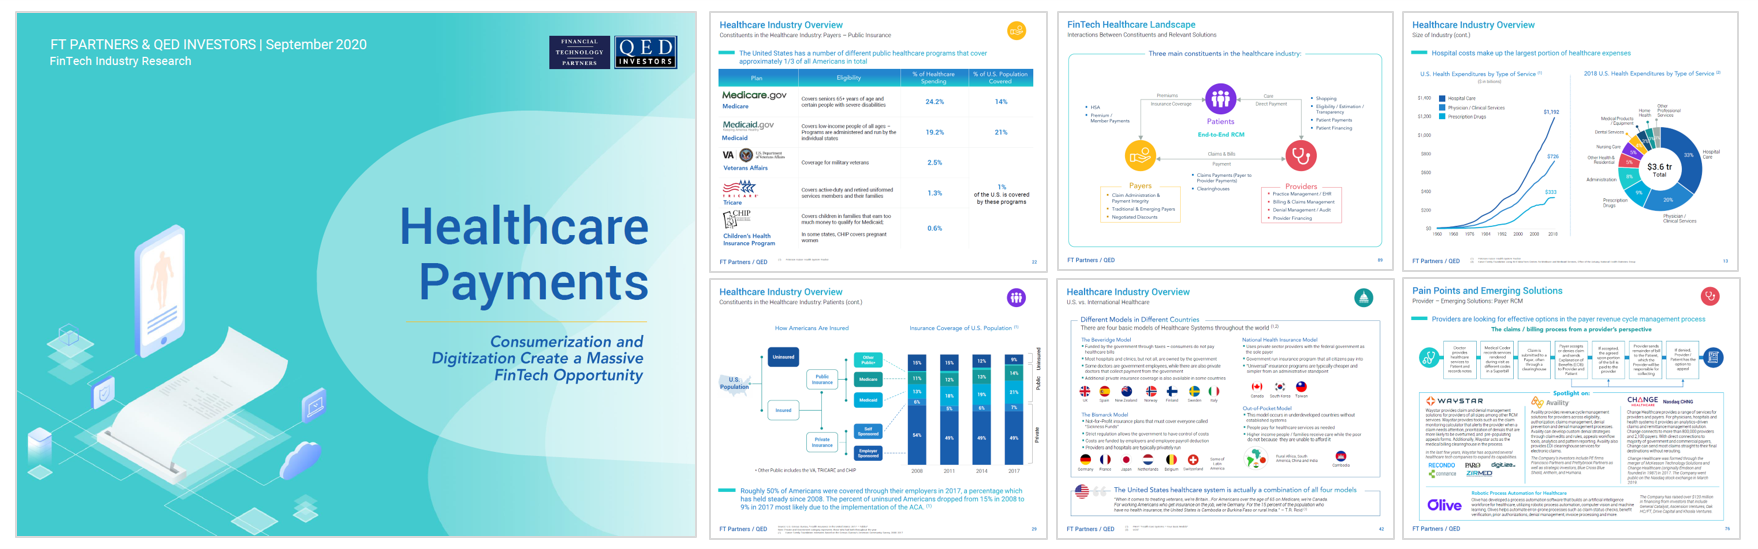 Healthcare Payments Research Report